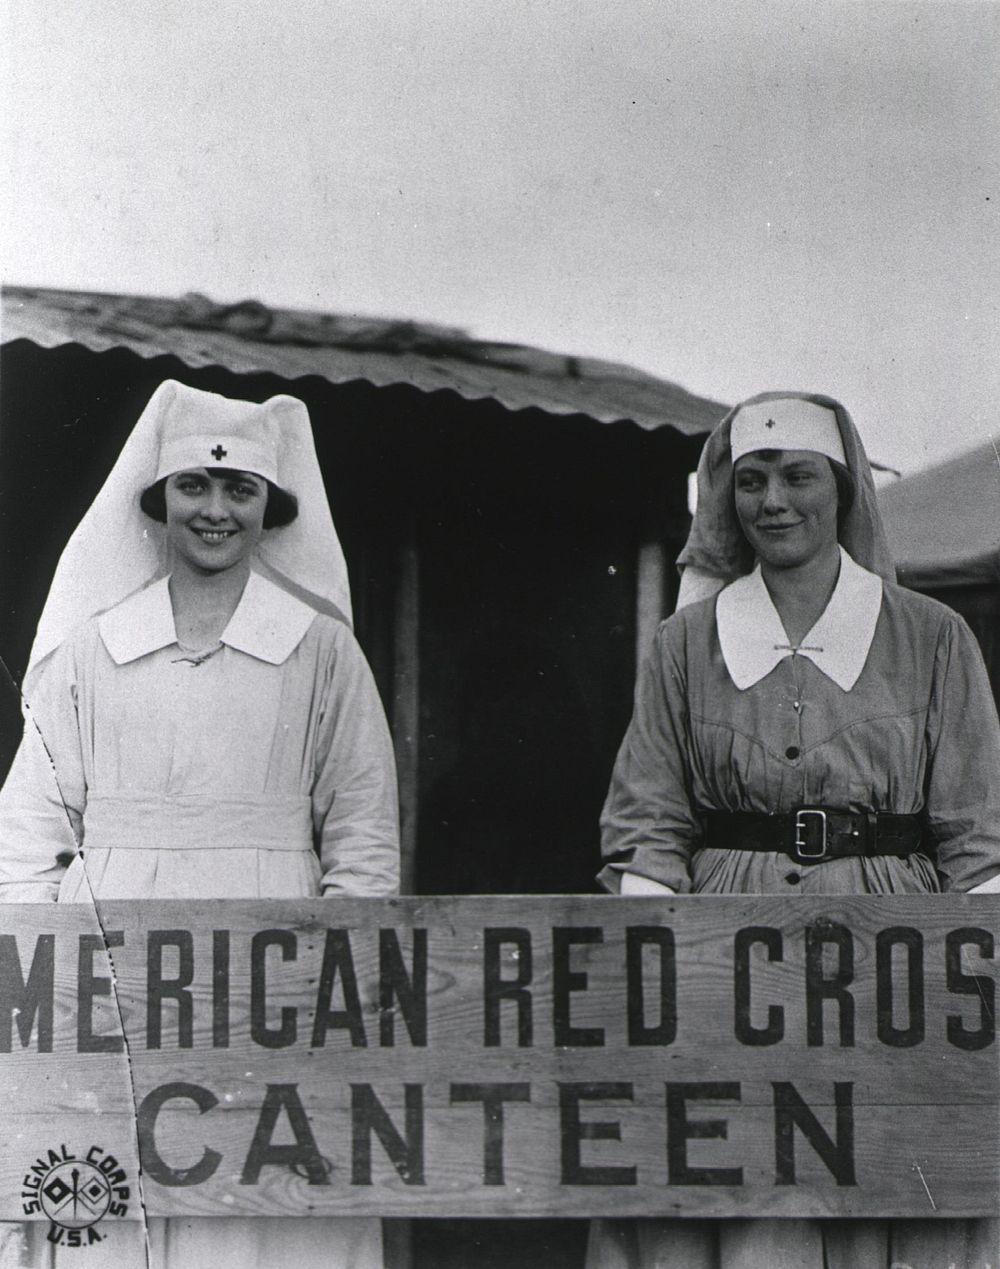 U.S. Army Evacuation Hospital No.12, Manil La Tour, France, Red Cross Canteen workers. Original public domain image from…